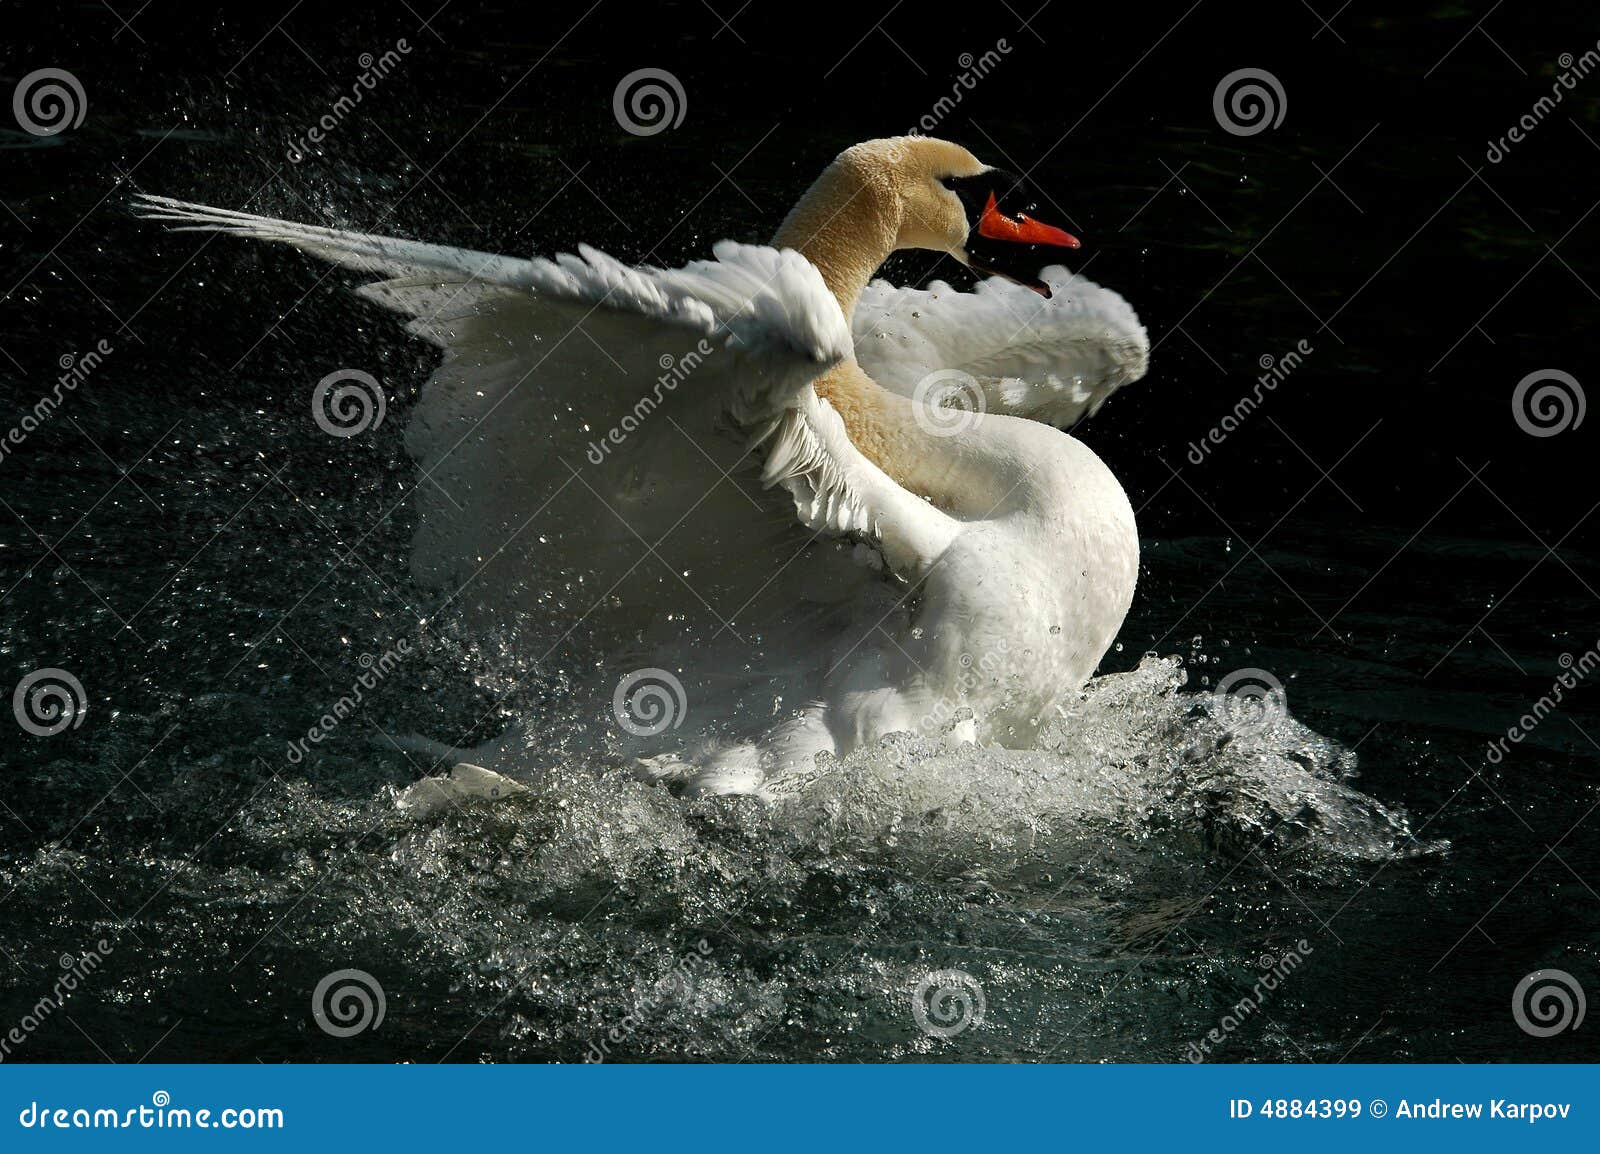 swan the tzar in a pond